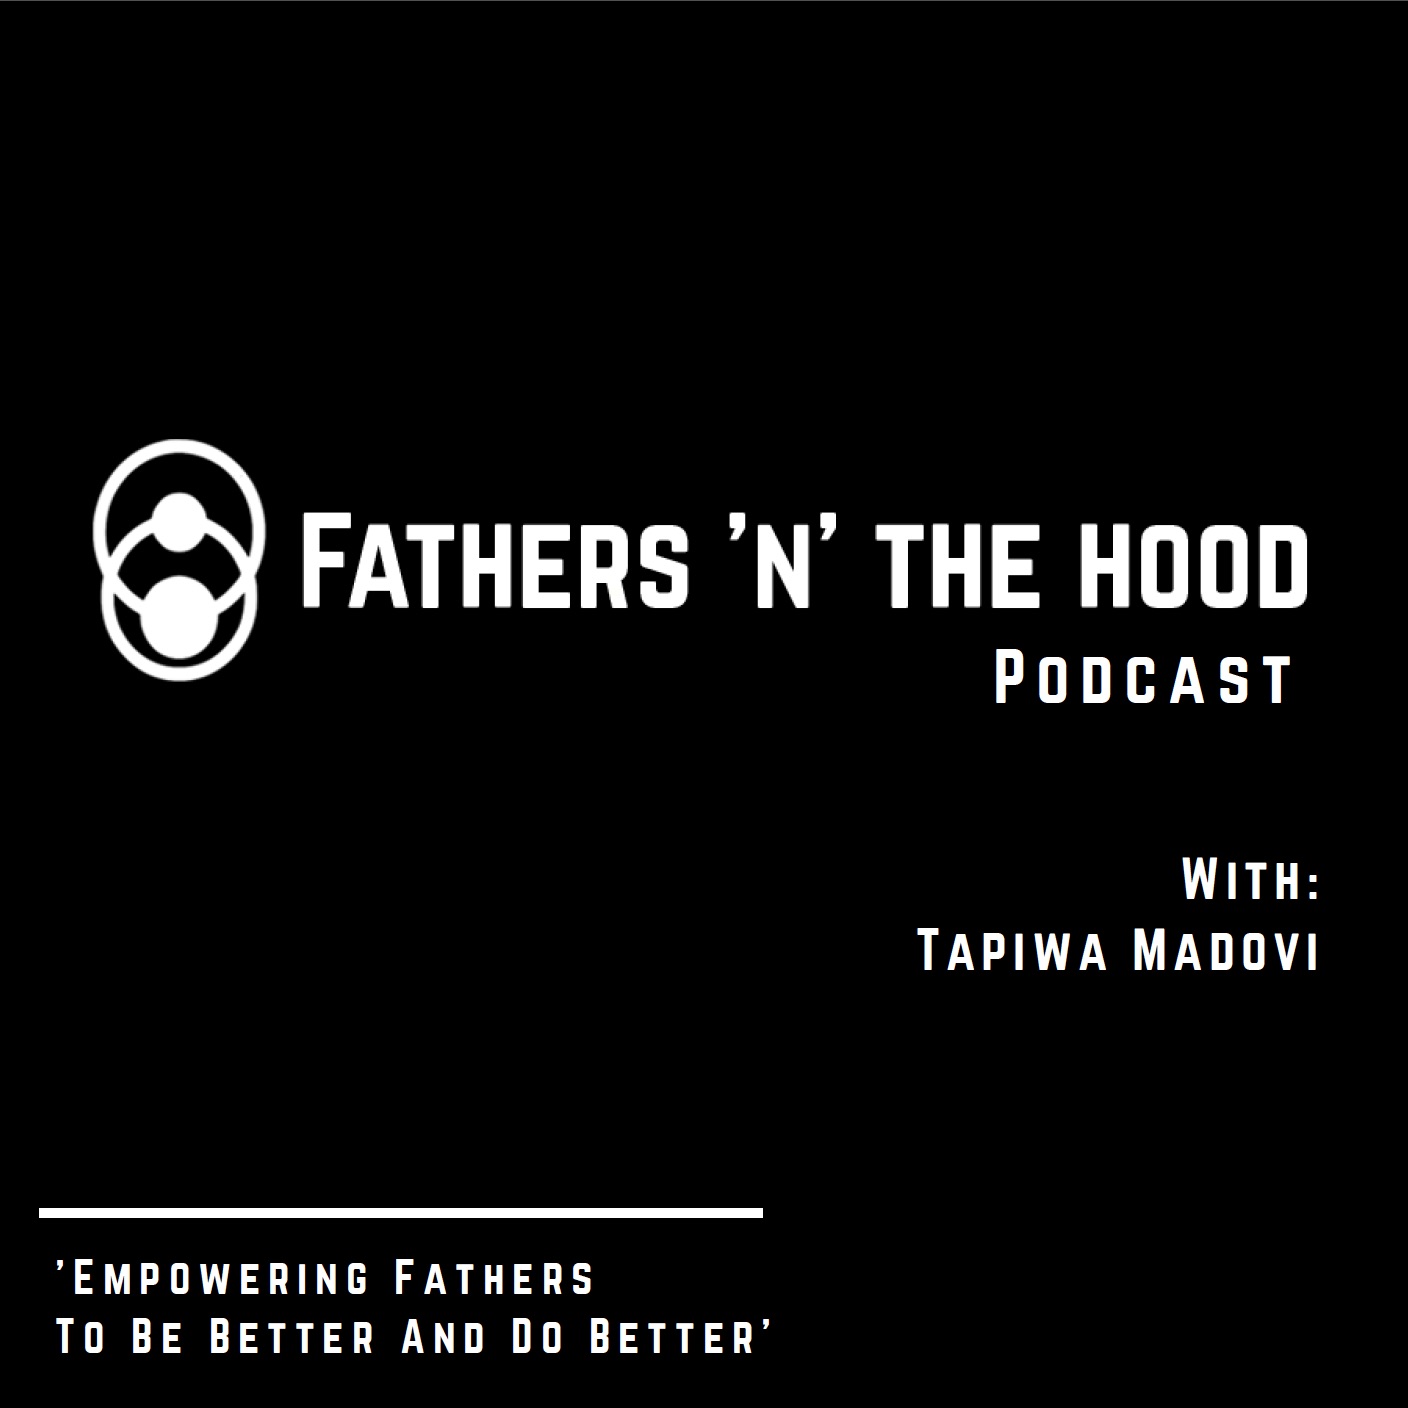 Fathers 'n' the Hood Podcast